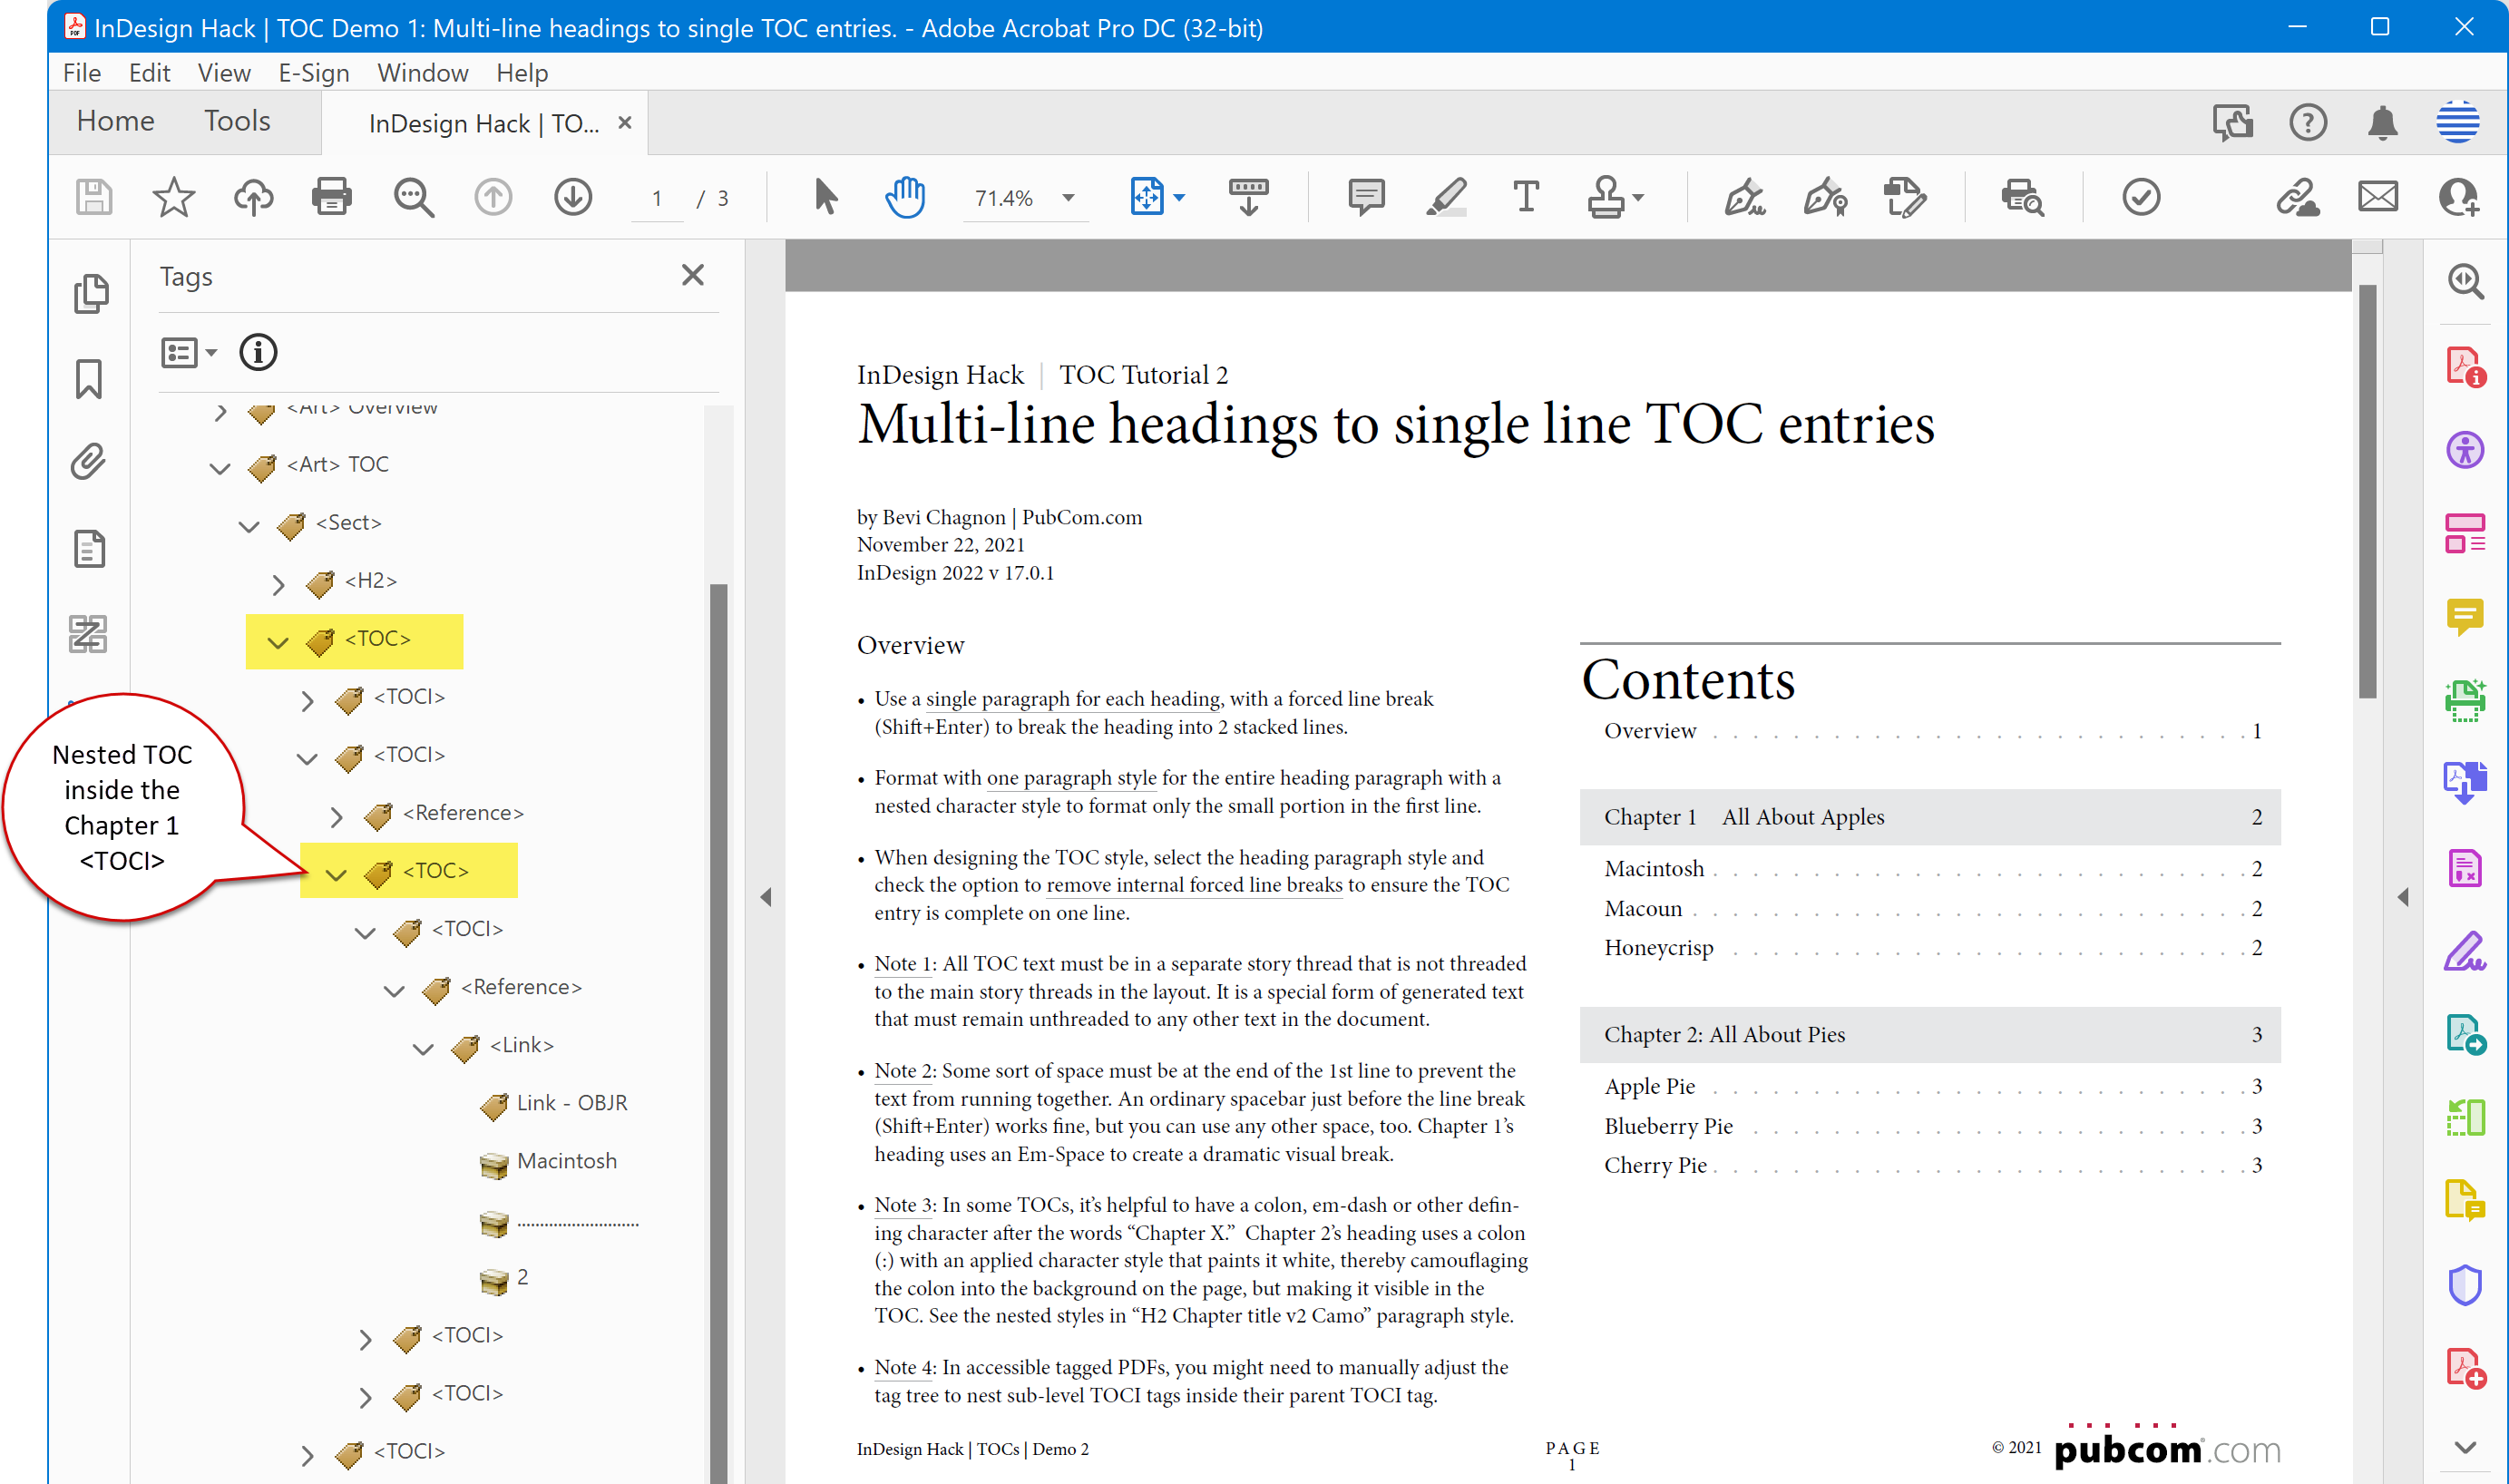 The final PDF in Adobe Acrobat shows the complex nested tags in the tags panel.